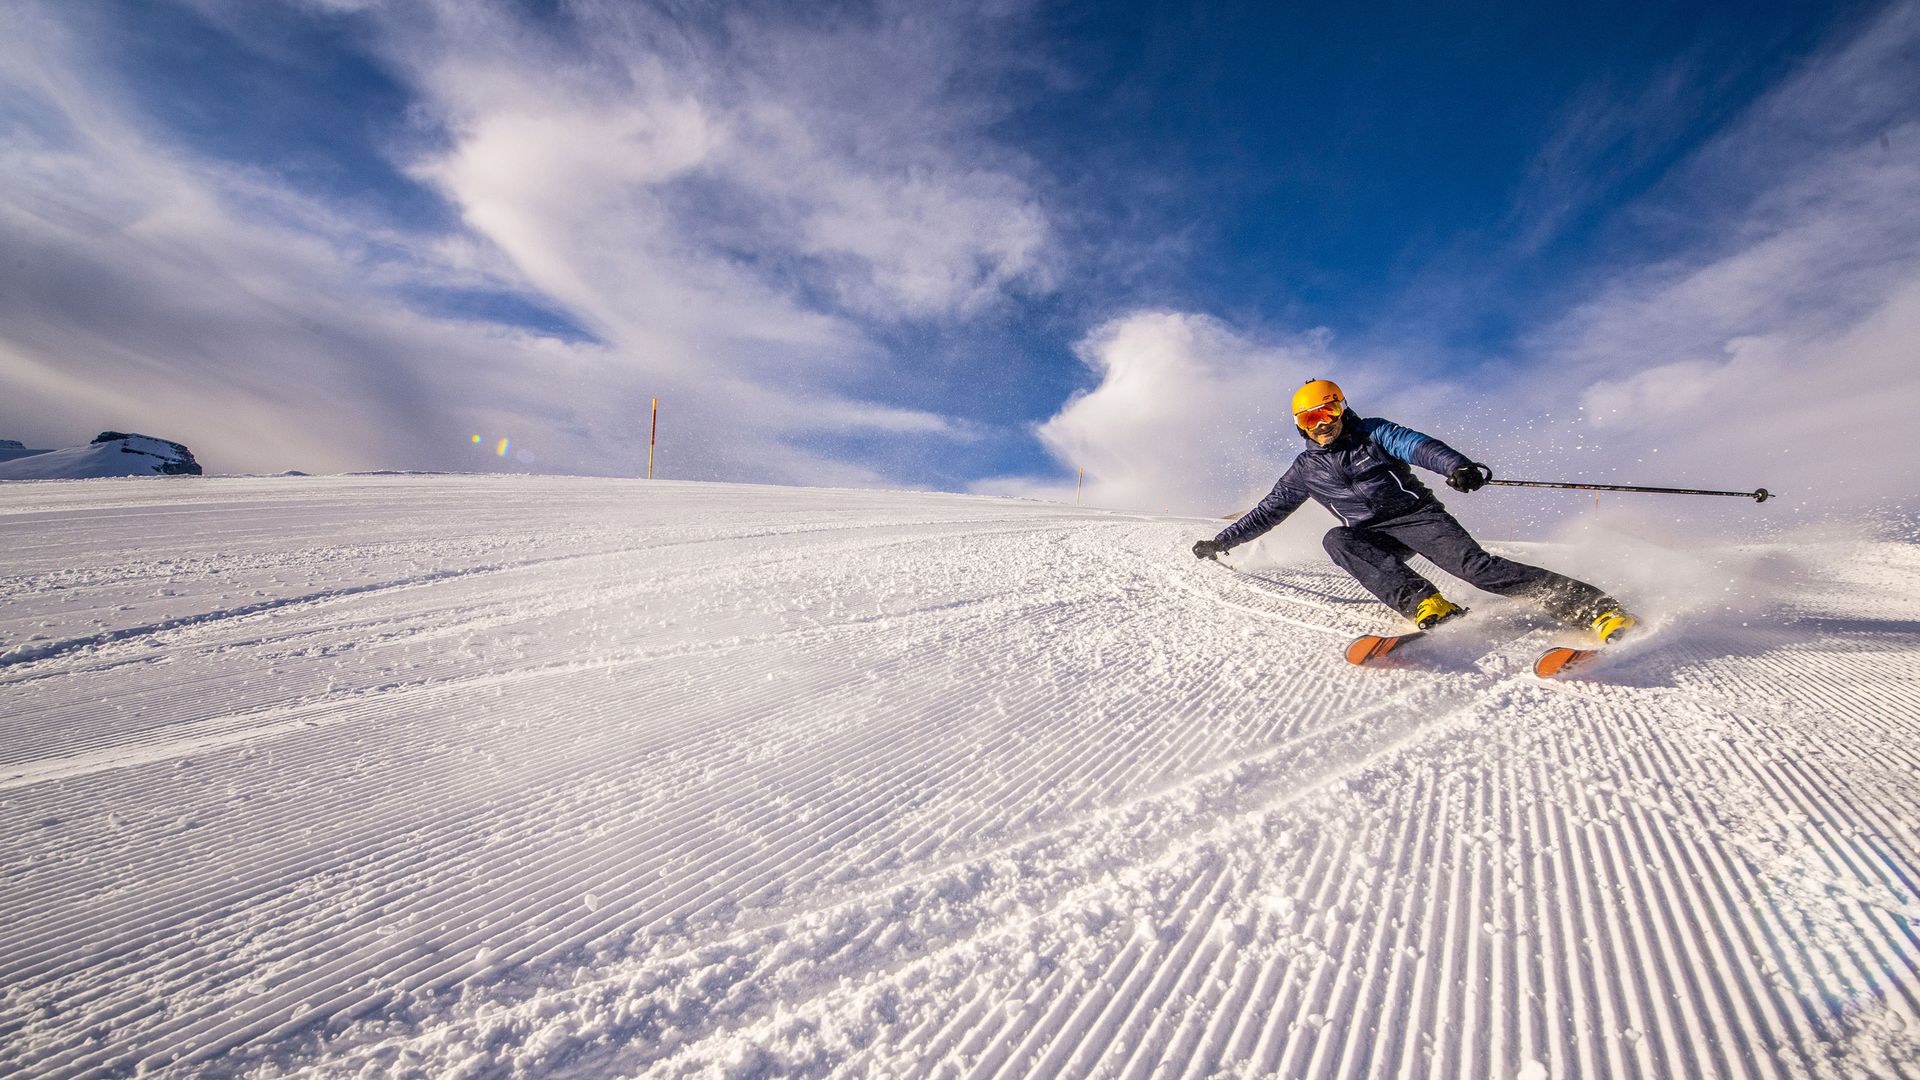 The picture shows a skier on a freshly groomed slope. He is leaning steeply into the turn and the snow is swirling up behind him. 